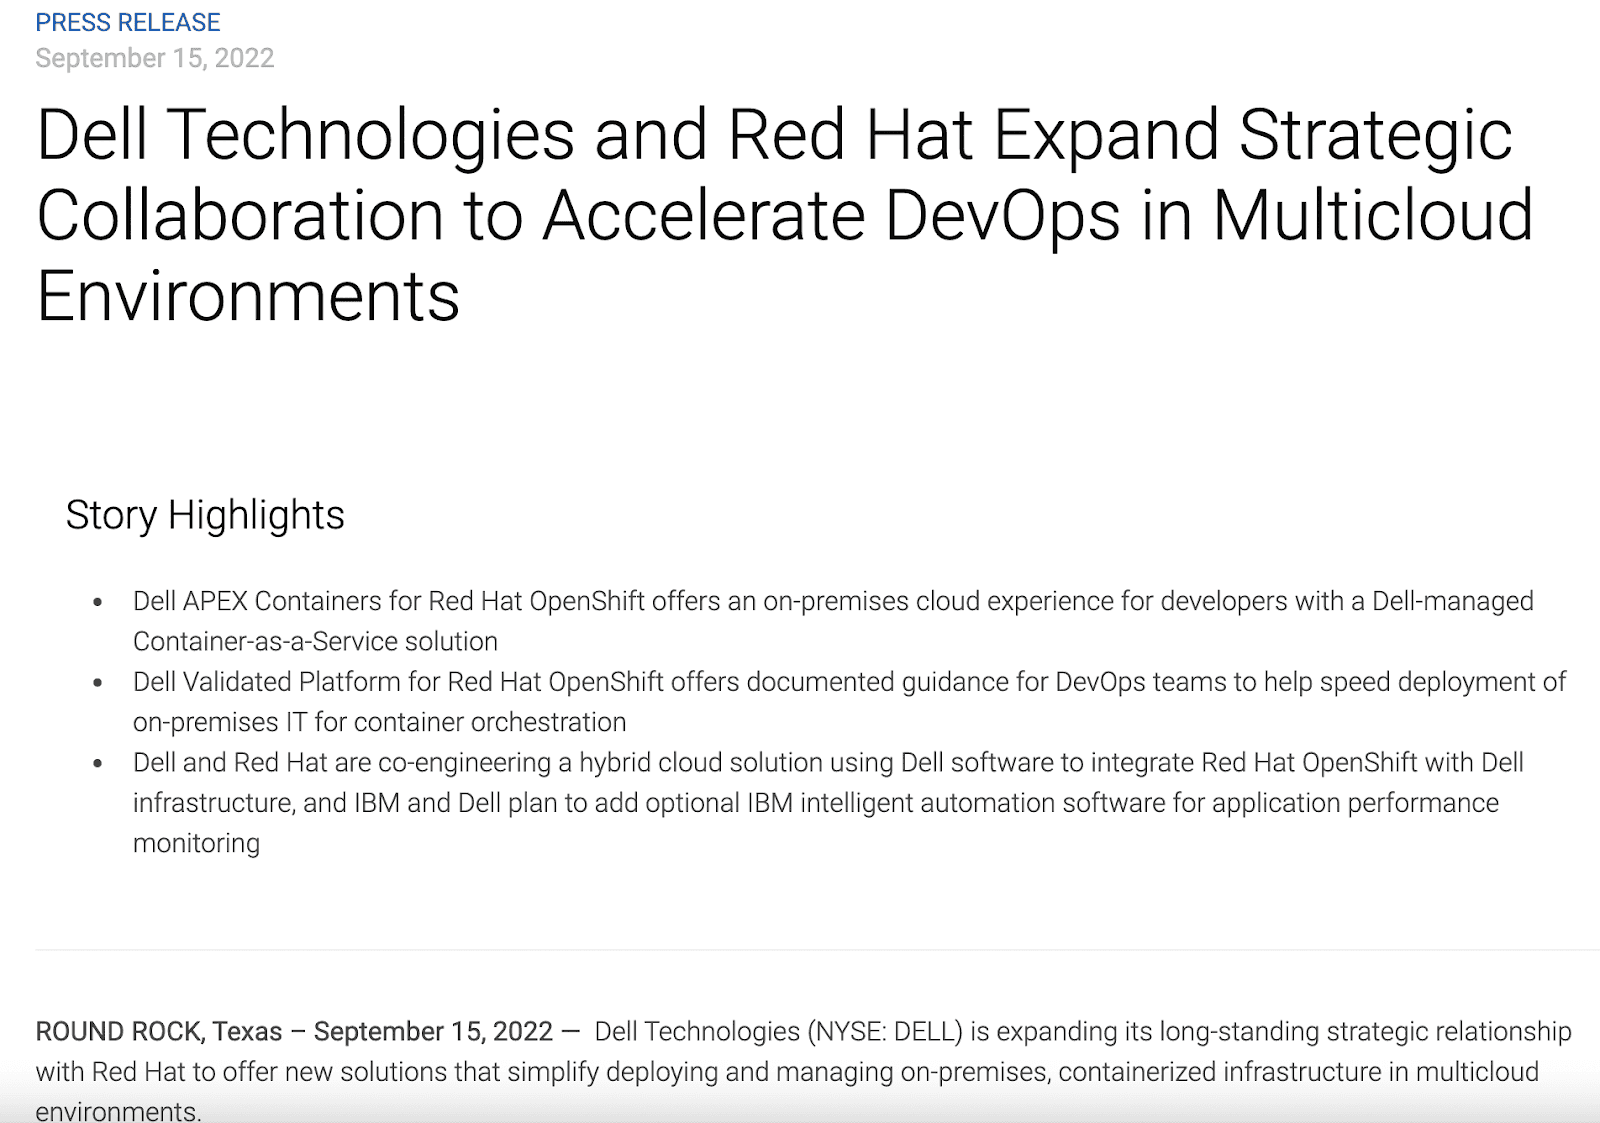 Dell's press release regarding a new partnership for the company